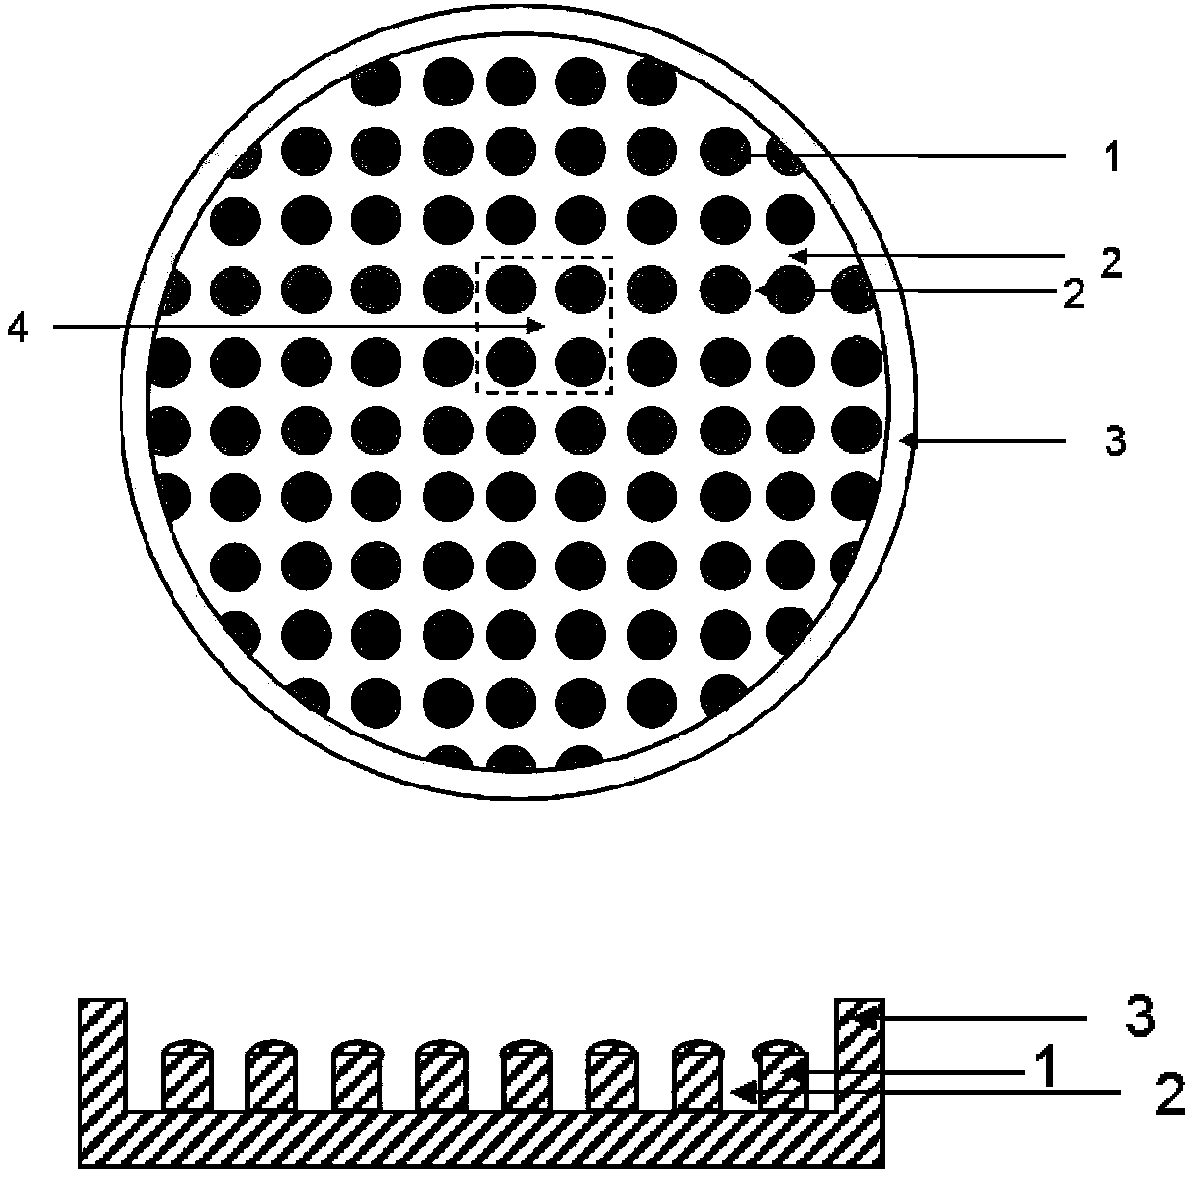 Microarray chip preparation method, and applications of microarray chip in stem cell type brain development